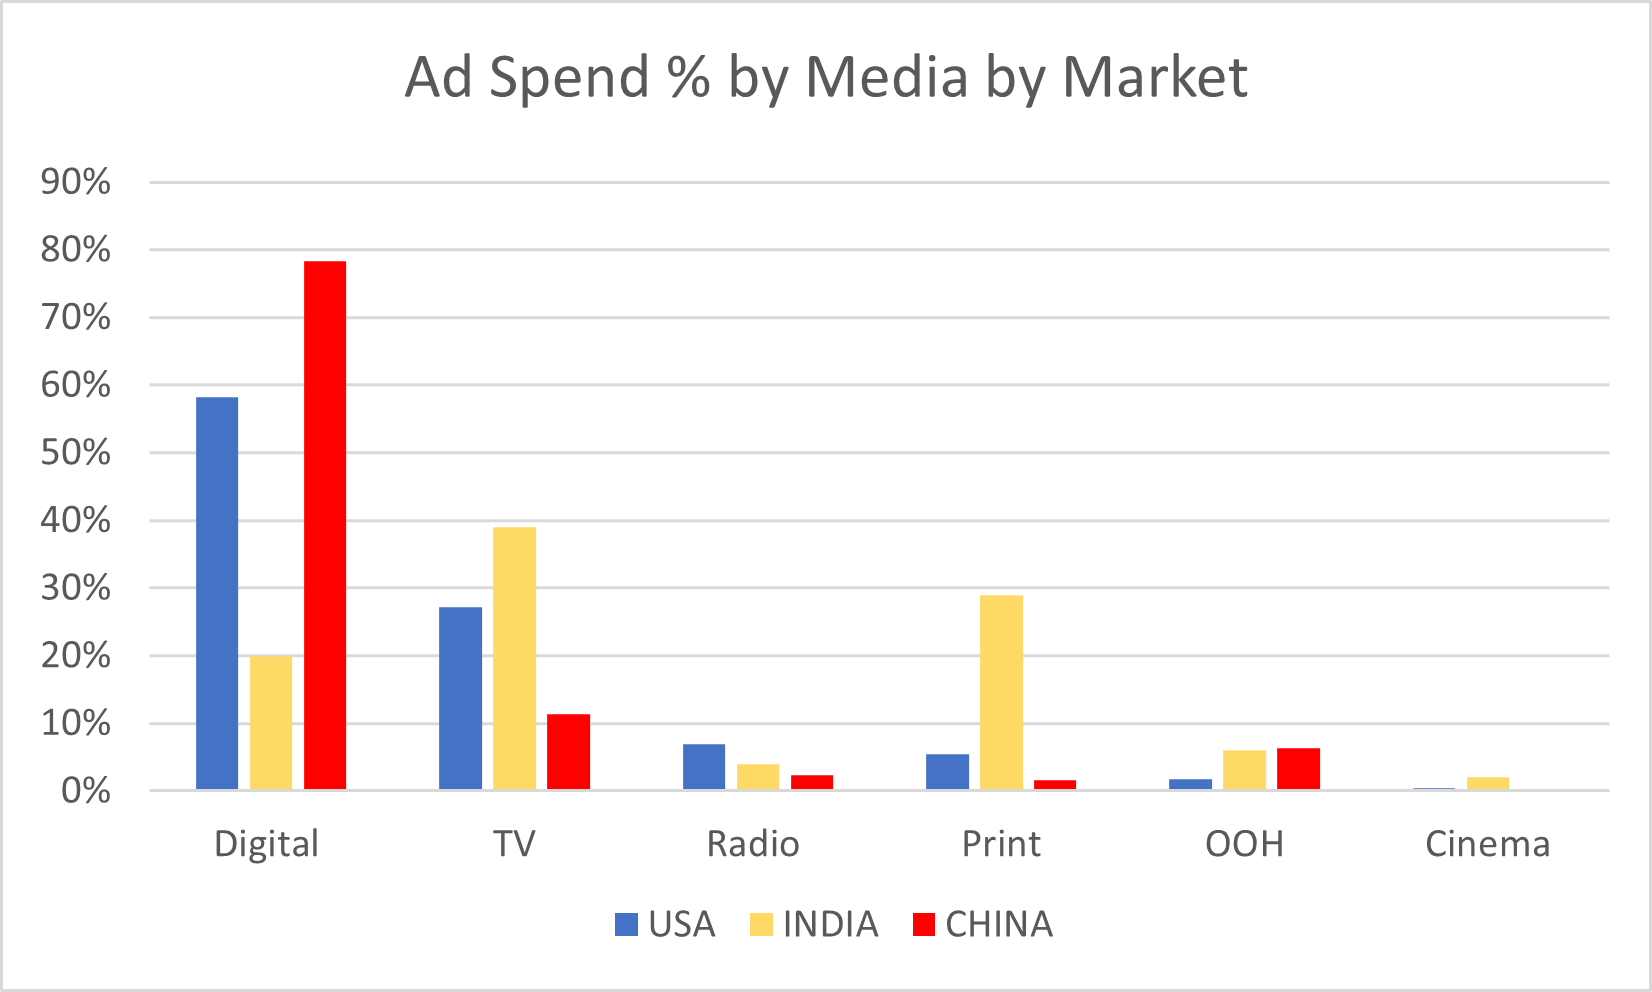 Ad spend % by media by market (USA, India and China)